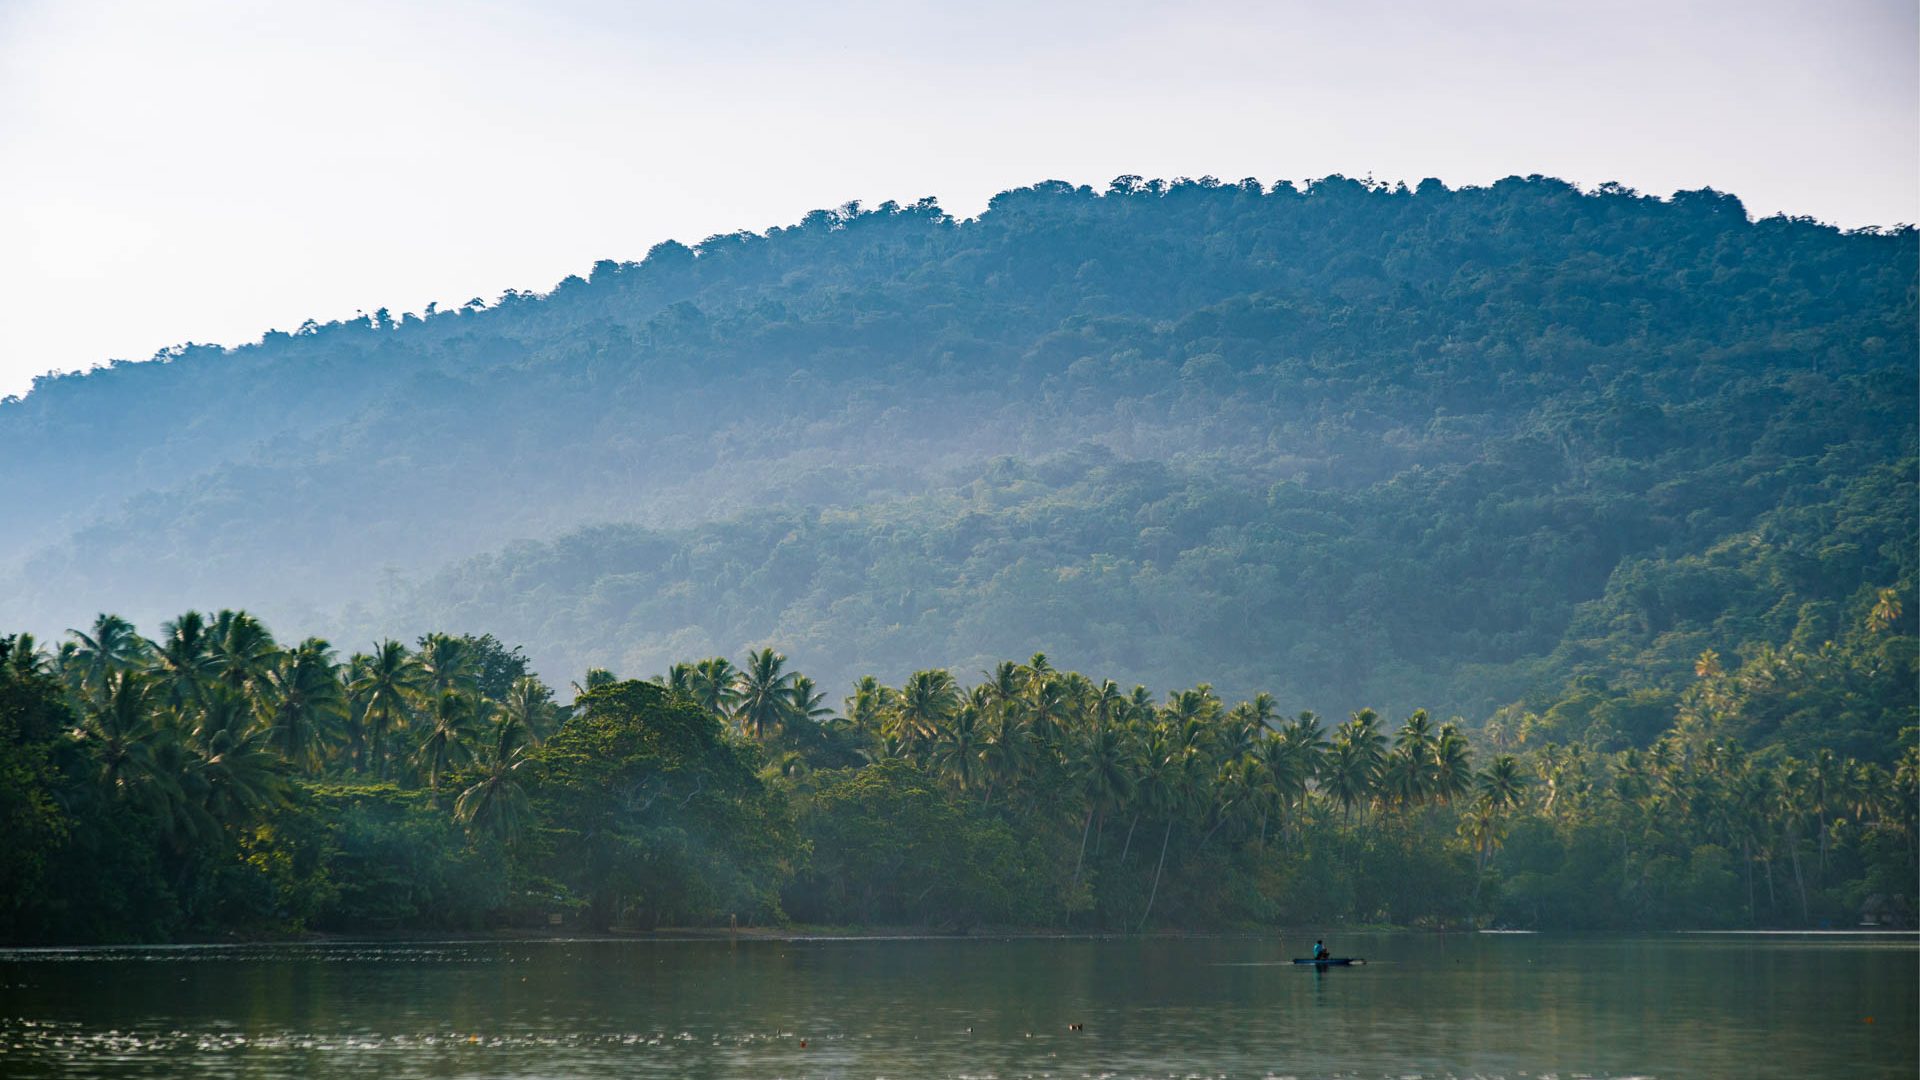 Rainforest meets ocean. We see someone in a canoe next to a palm lined shore with a large misty hill covered in trees in the background.